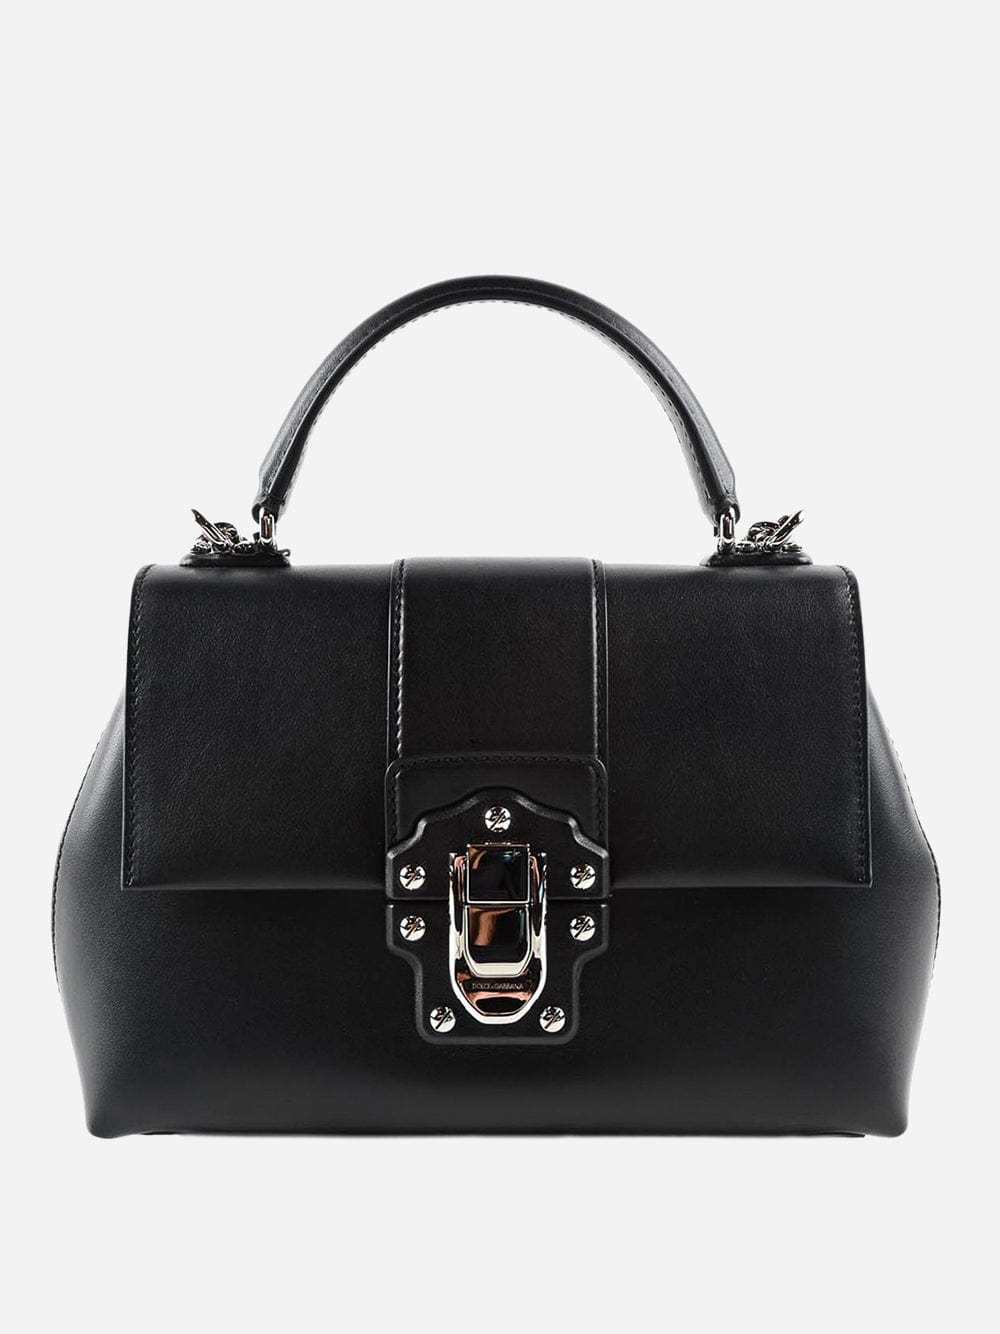 Dolce & Gabbana Lucia Leather Tote Bag